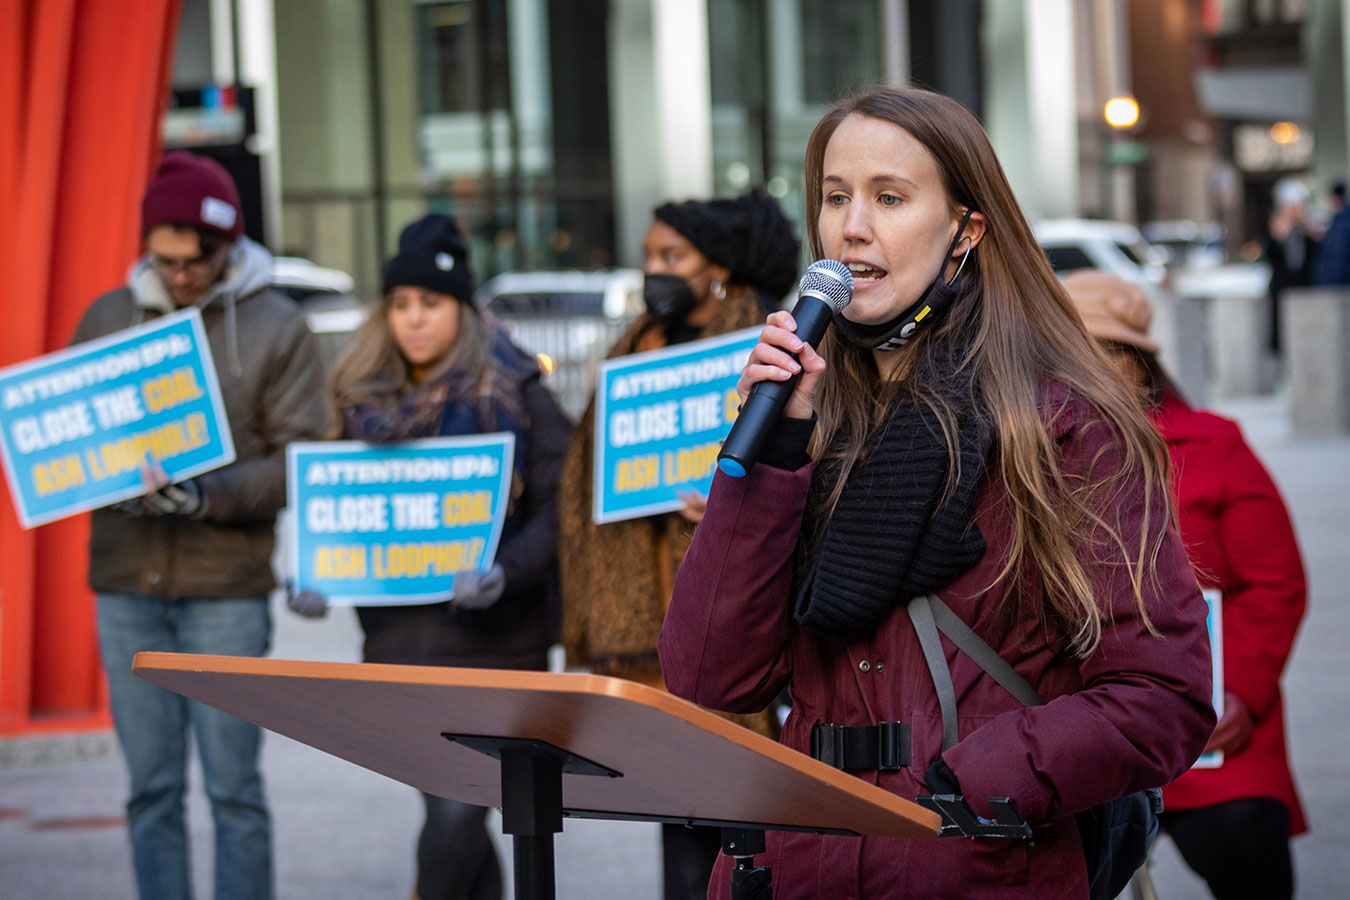 Just Transition Northwest Indiana Executive Director Ashley Williams speaking at a rally in front of the EPA in Chicago. | Photo by Matthew Kaplan